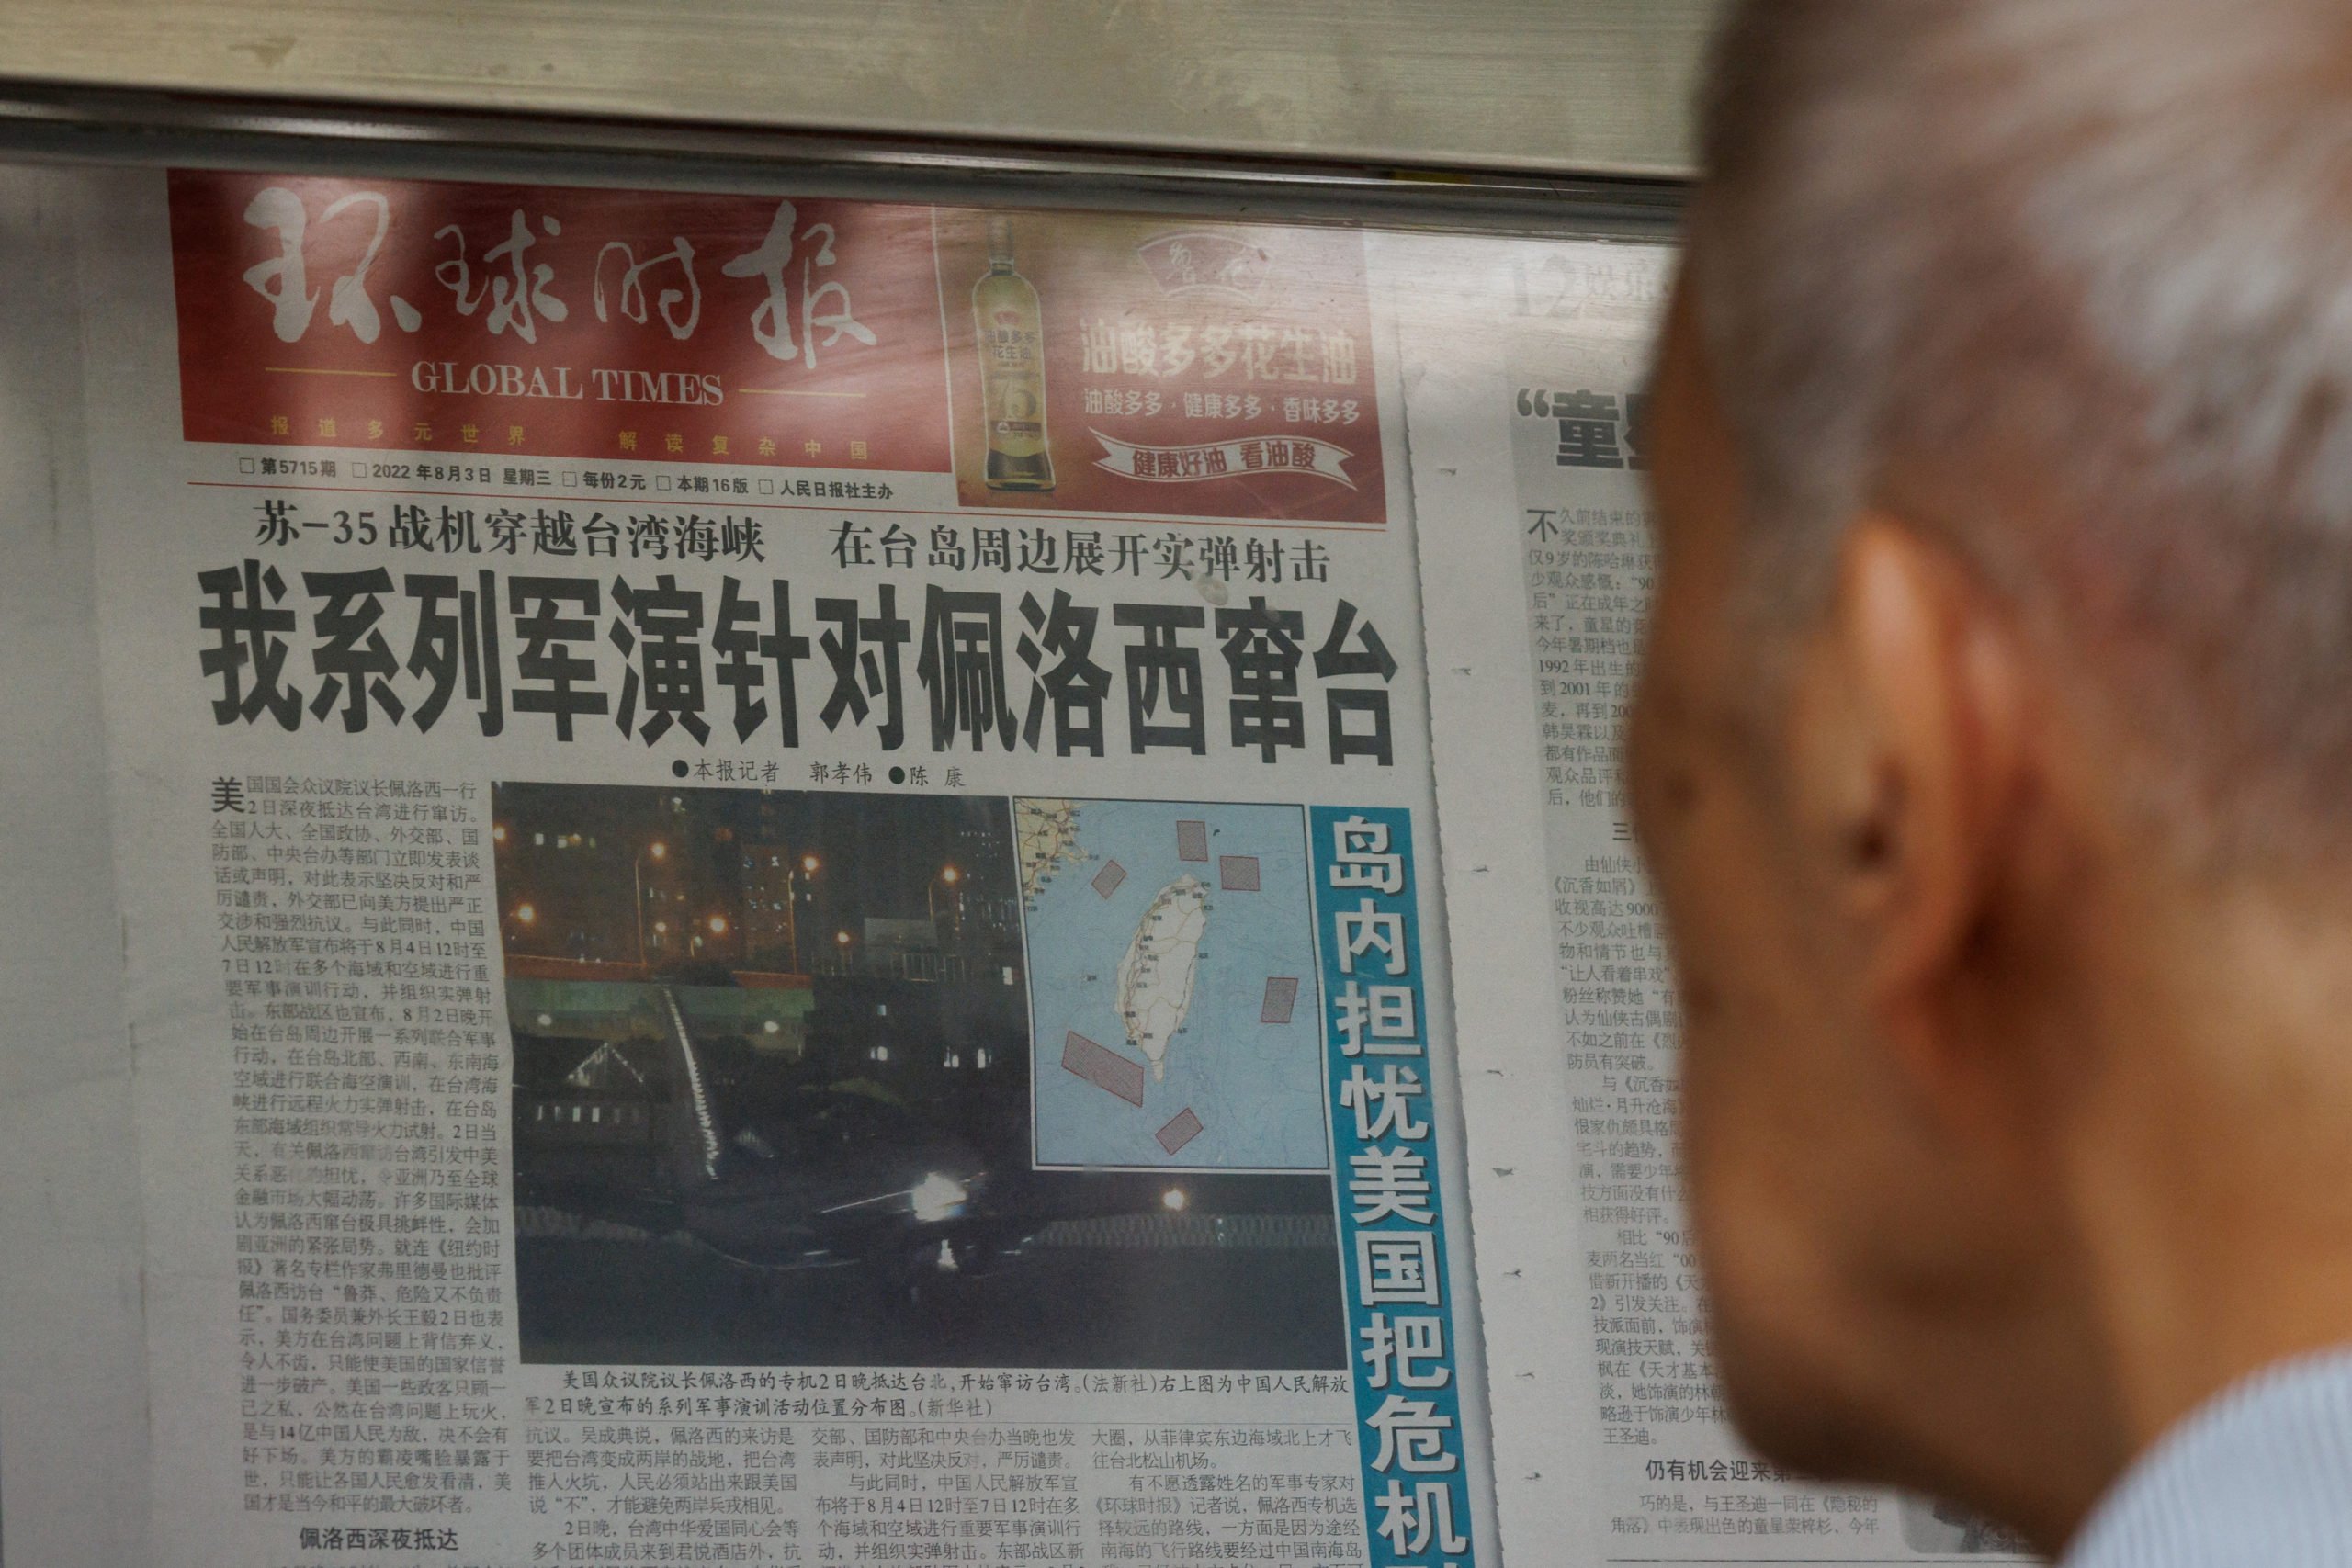 A man reads a Global Times article about military exercises by the Chinese People's Liberation Army (PLA) following U.S. House of Representatives Speaker Nancy Pelosi's Taiwan visit, at a newspaper stand in Beijing, China, August 4, 2022. REUTERS/Thomas Peter